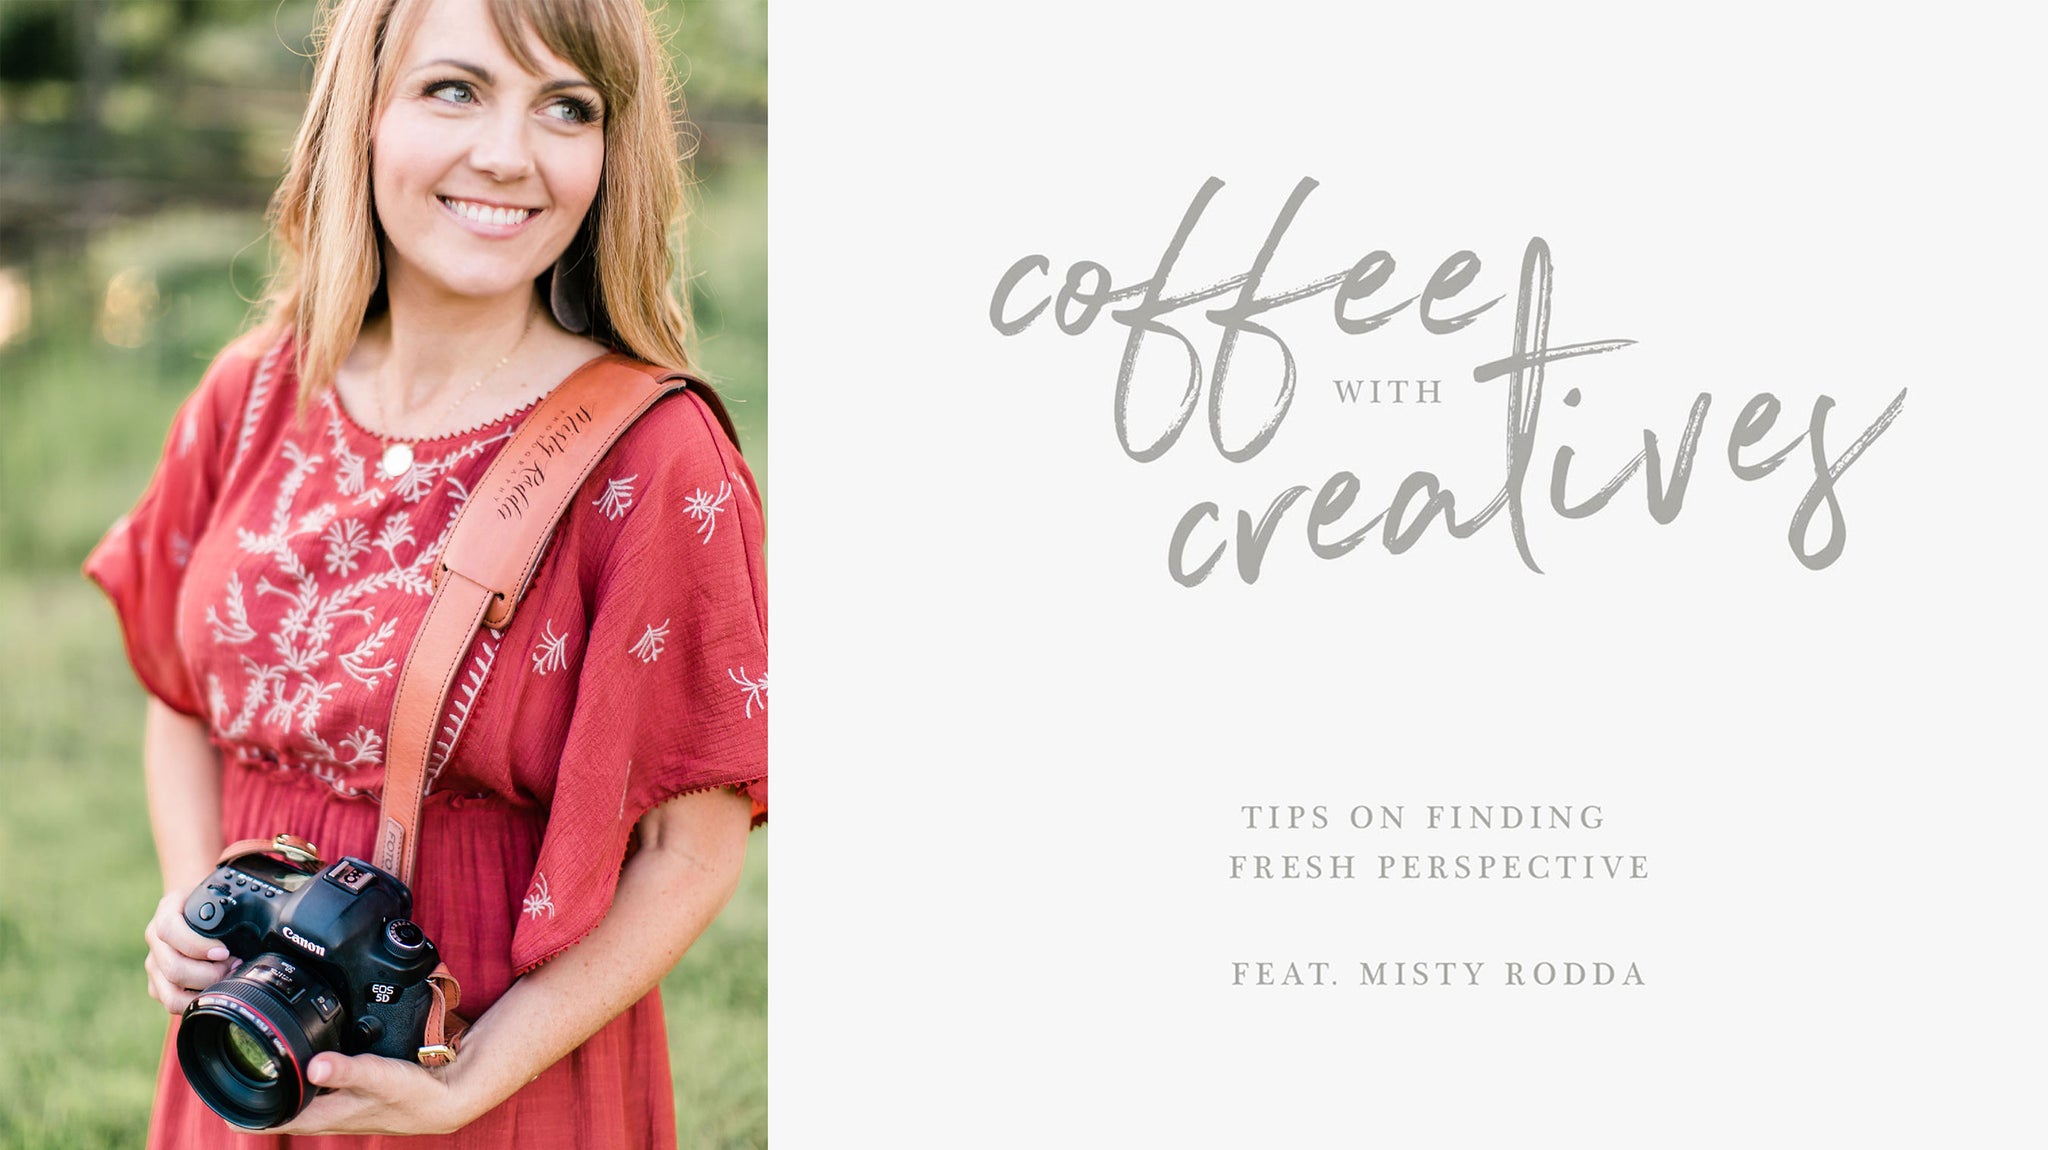 Professional wedding and portrait photographer, Misty Rodda, shares her tips and tricks on how to keep your perspective and creativity fresh!